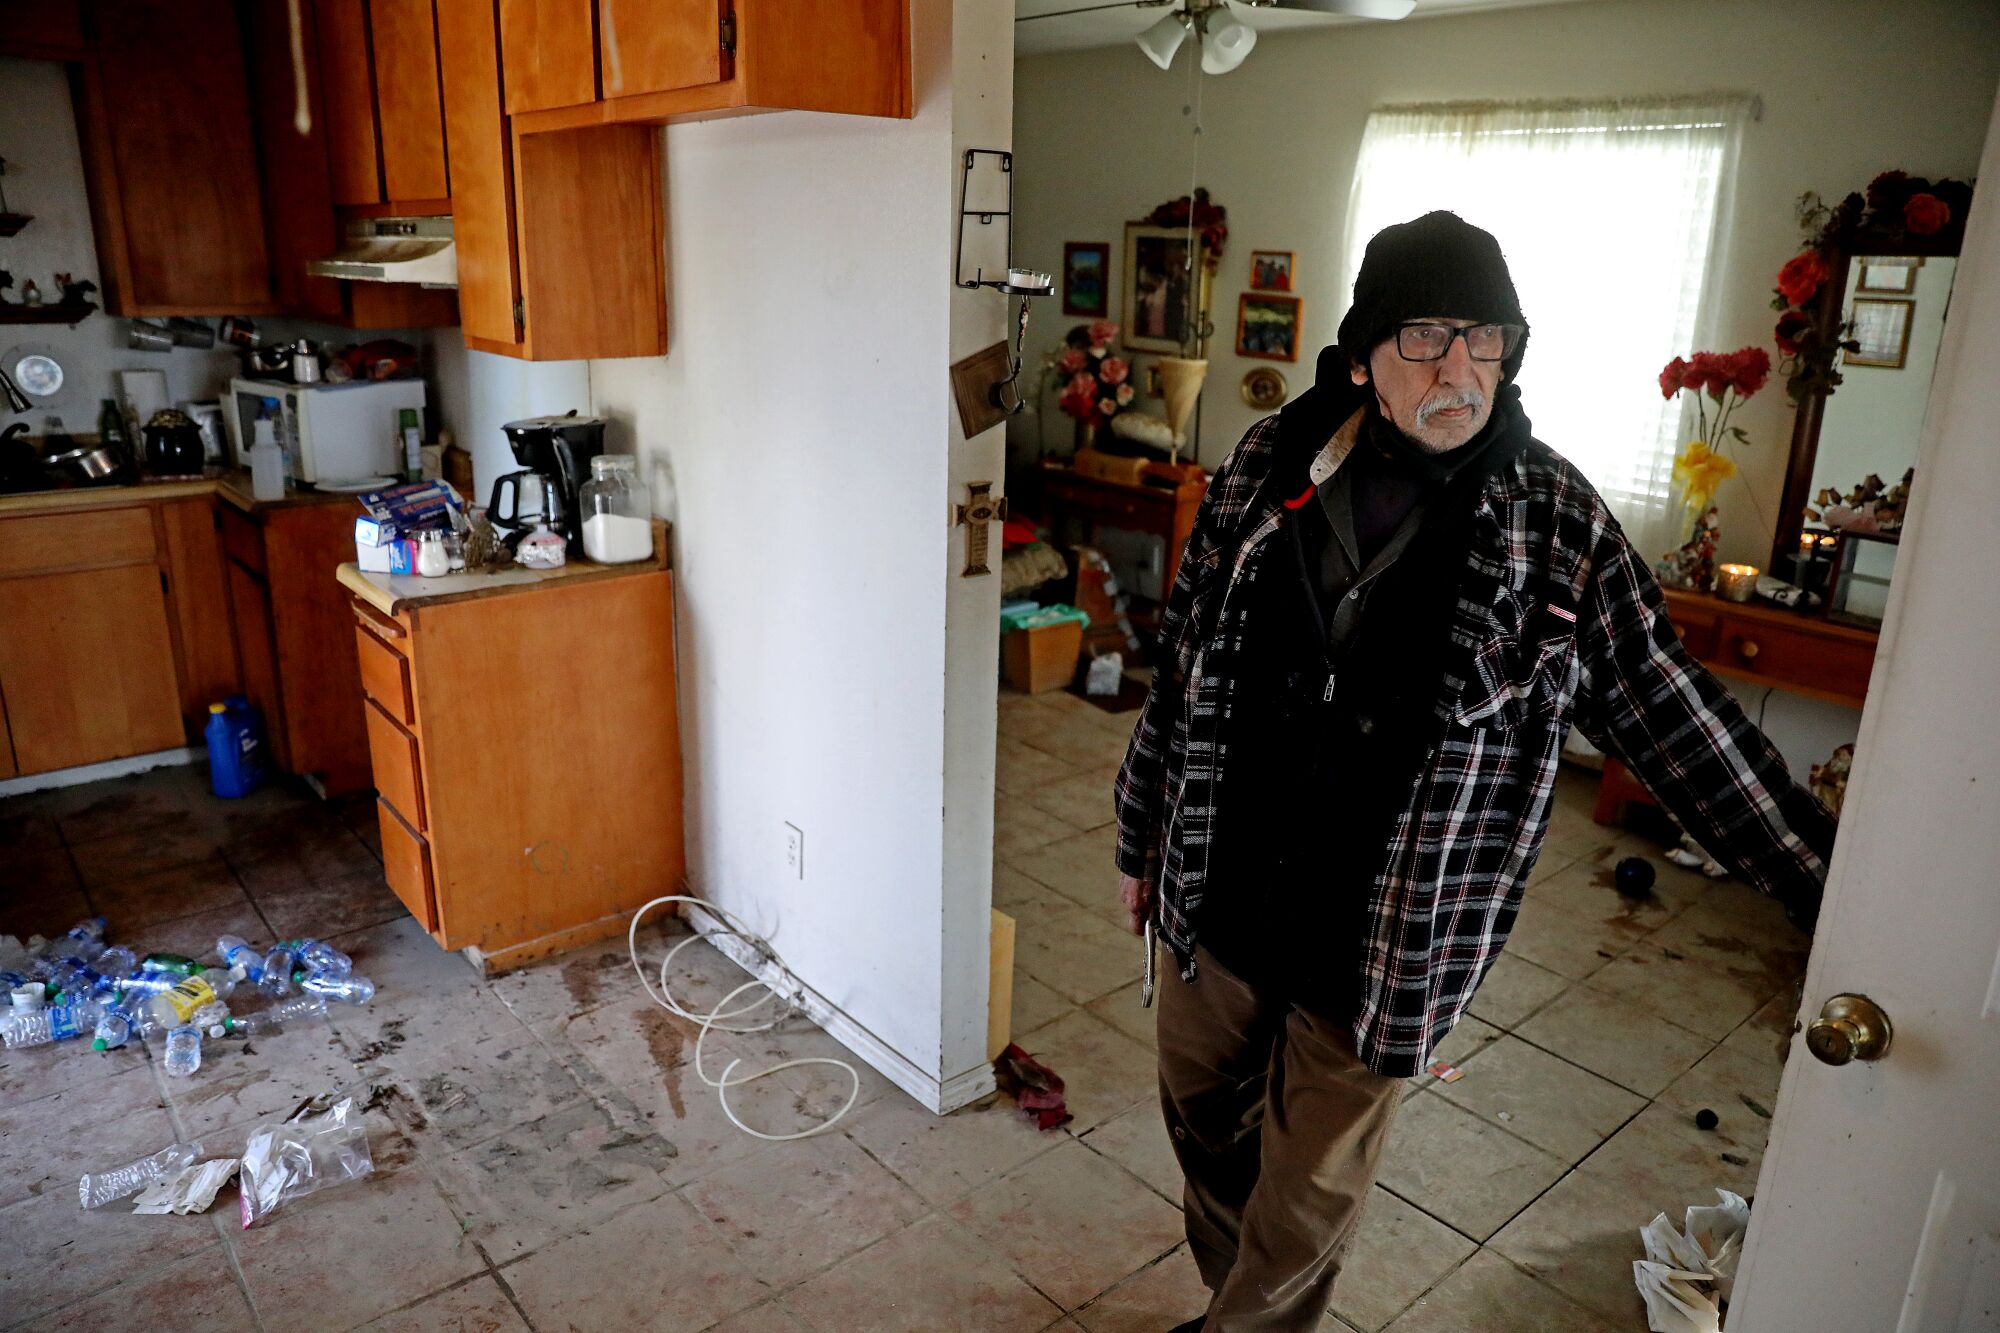 A man stands inside a small kitchen with damaged flooring.